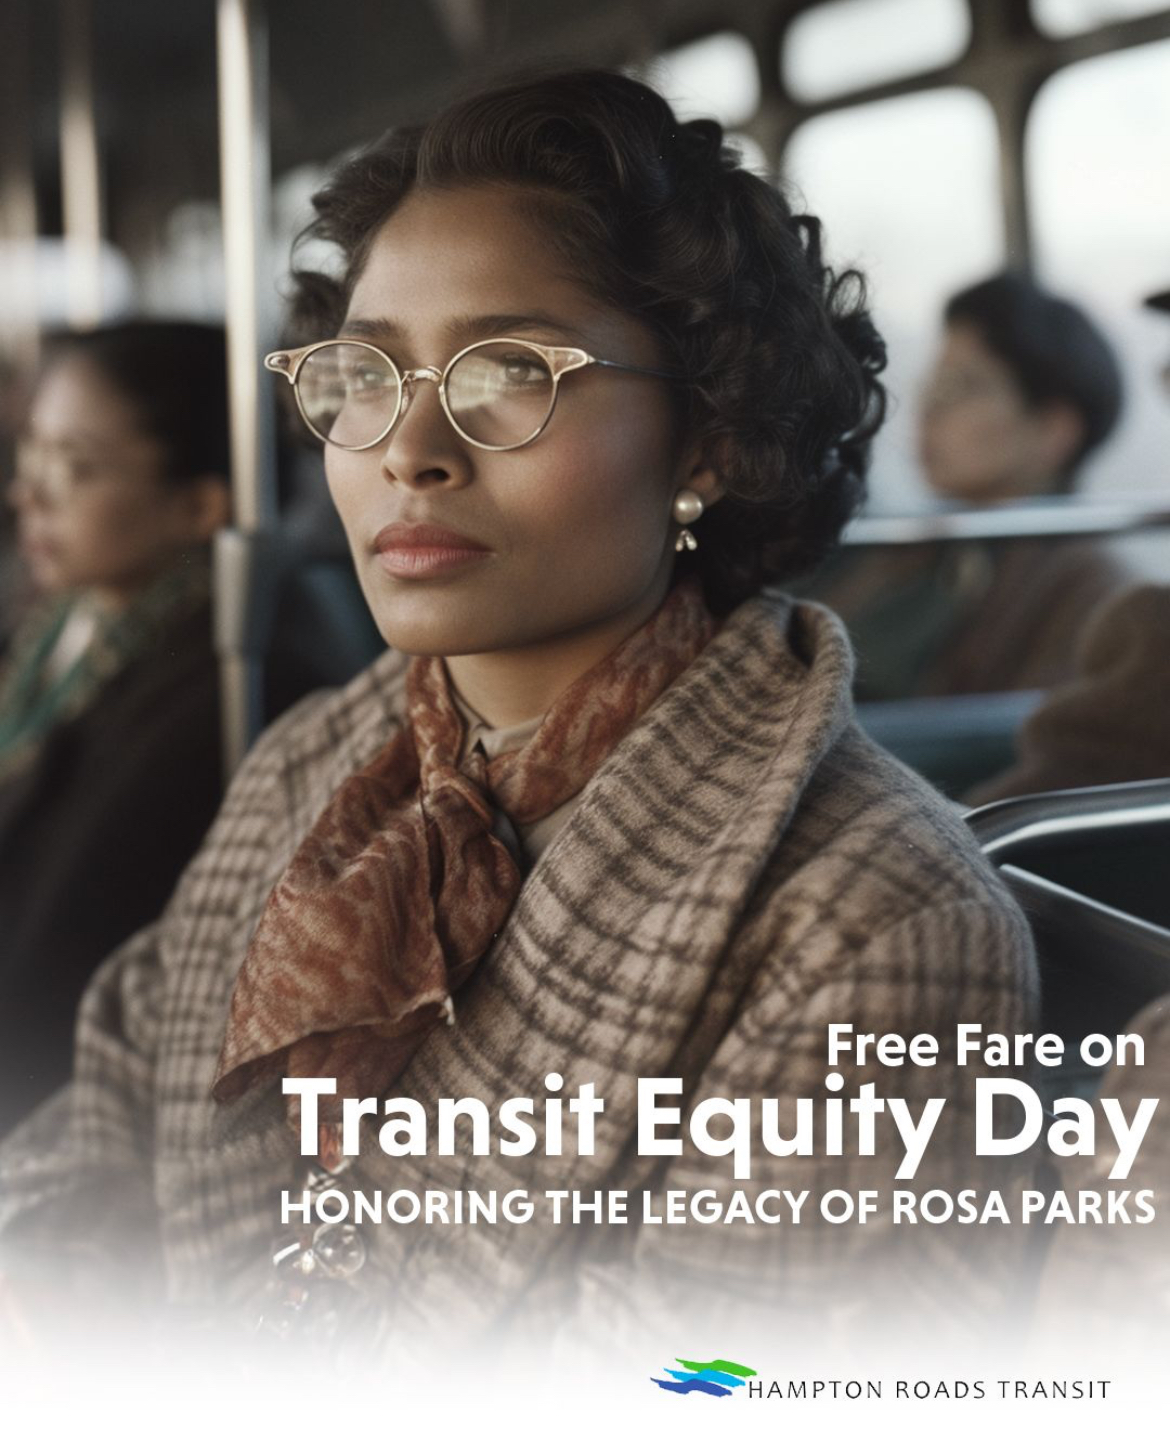 depiction of rosa parks sitting on a bus